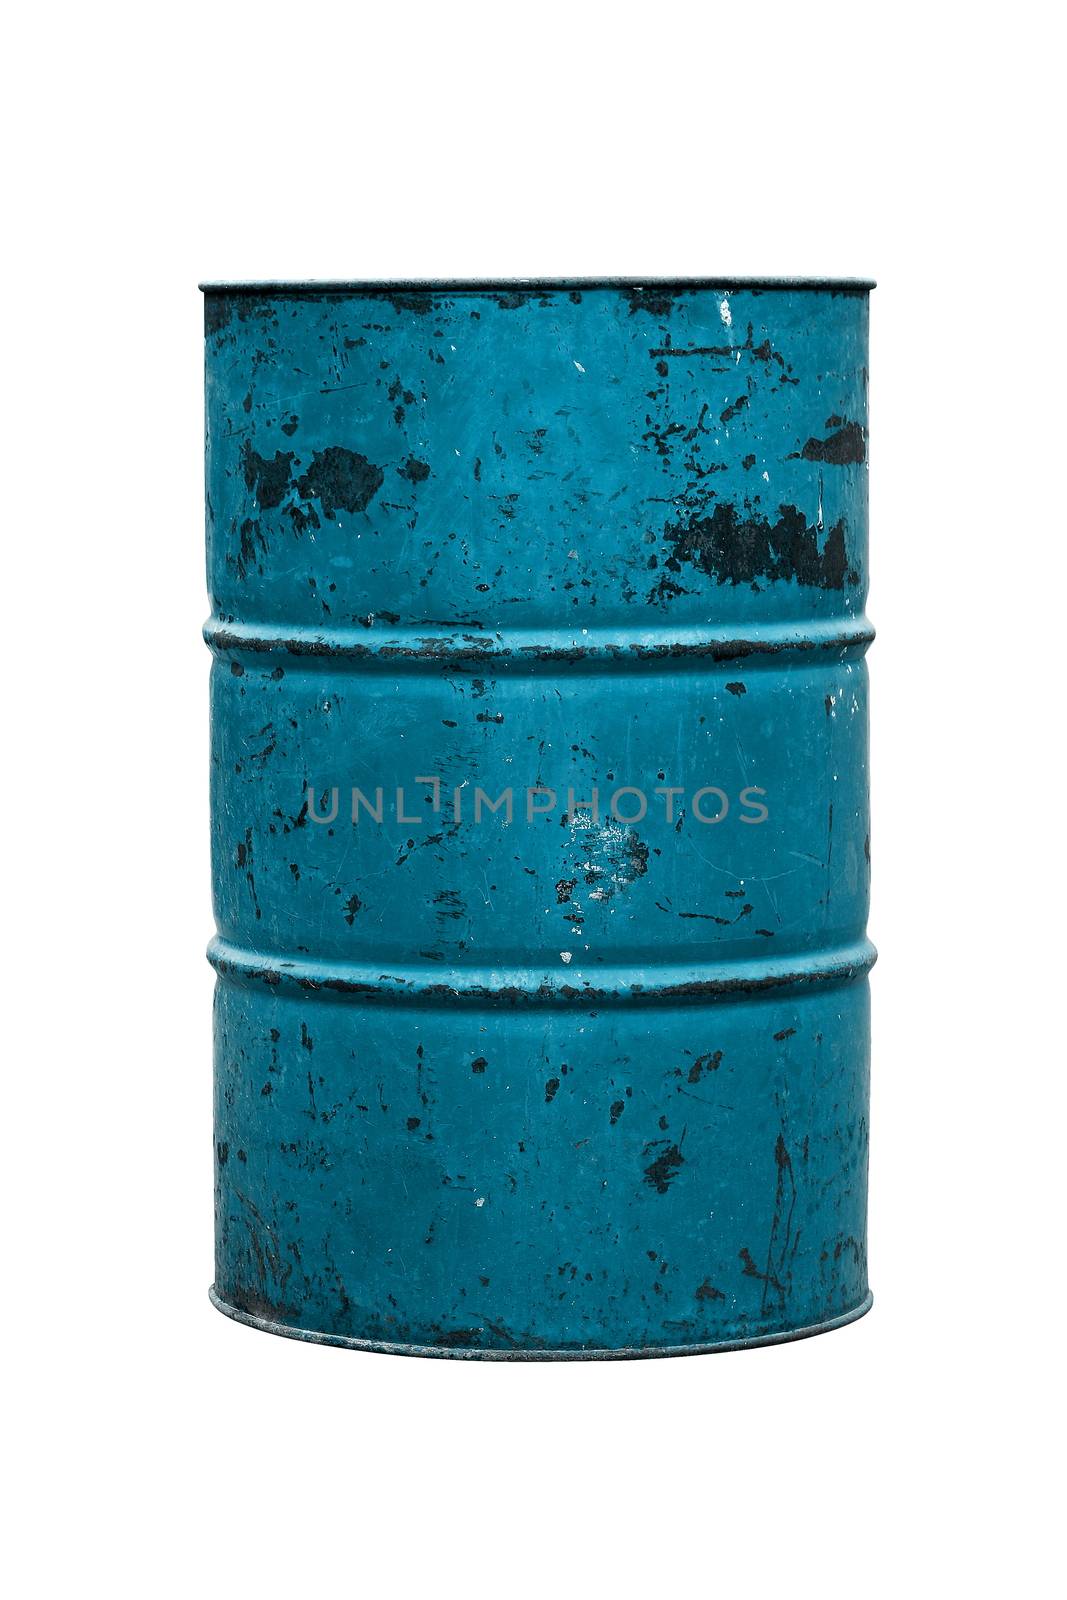 Barrel Oil blue Old isolated on background white by cgdeaw